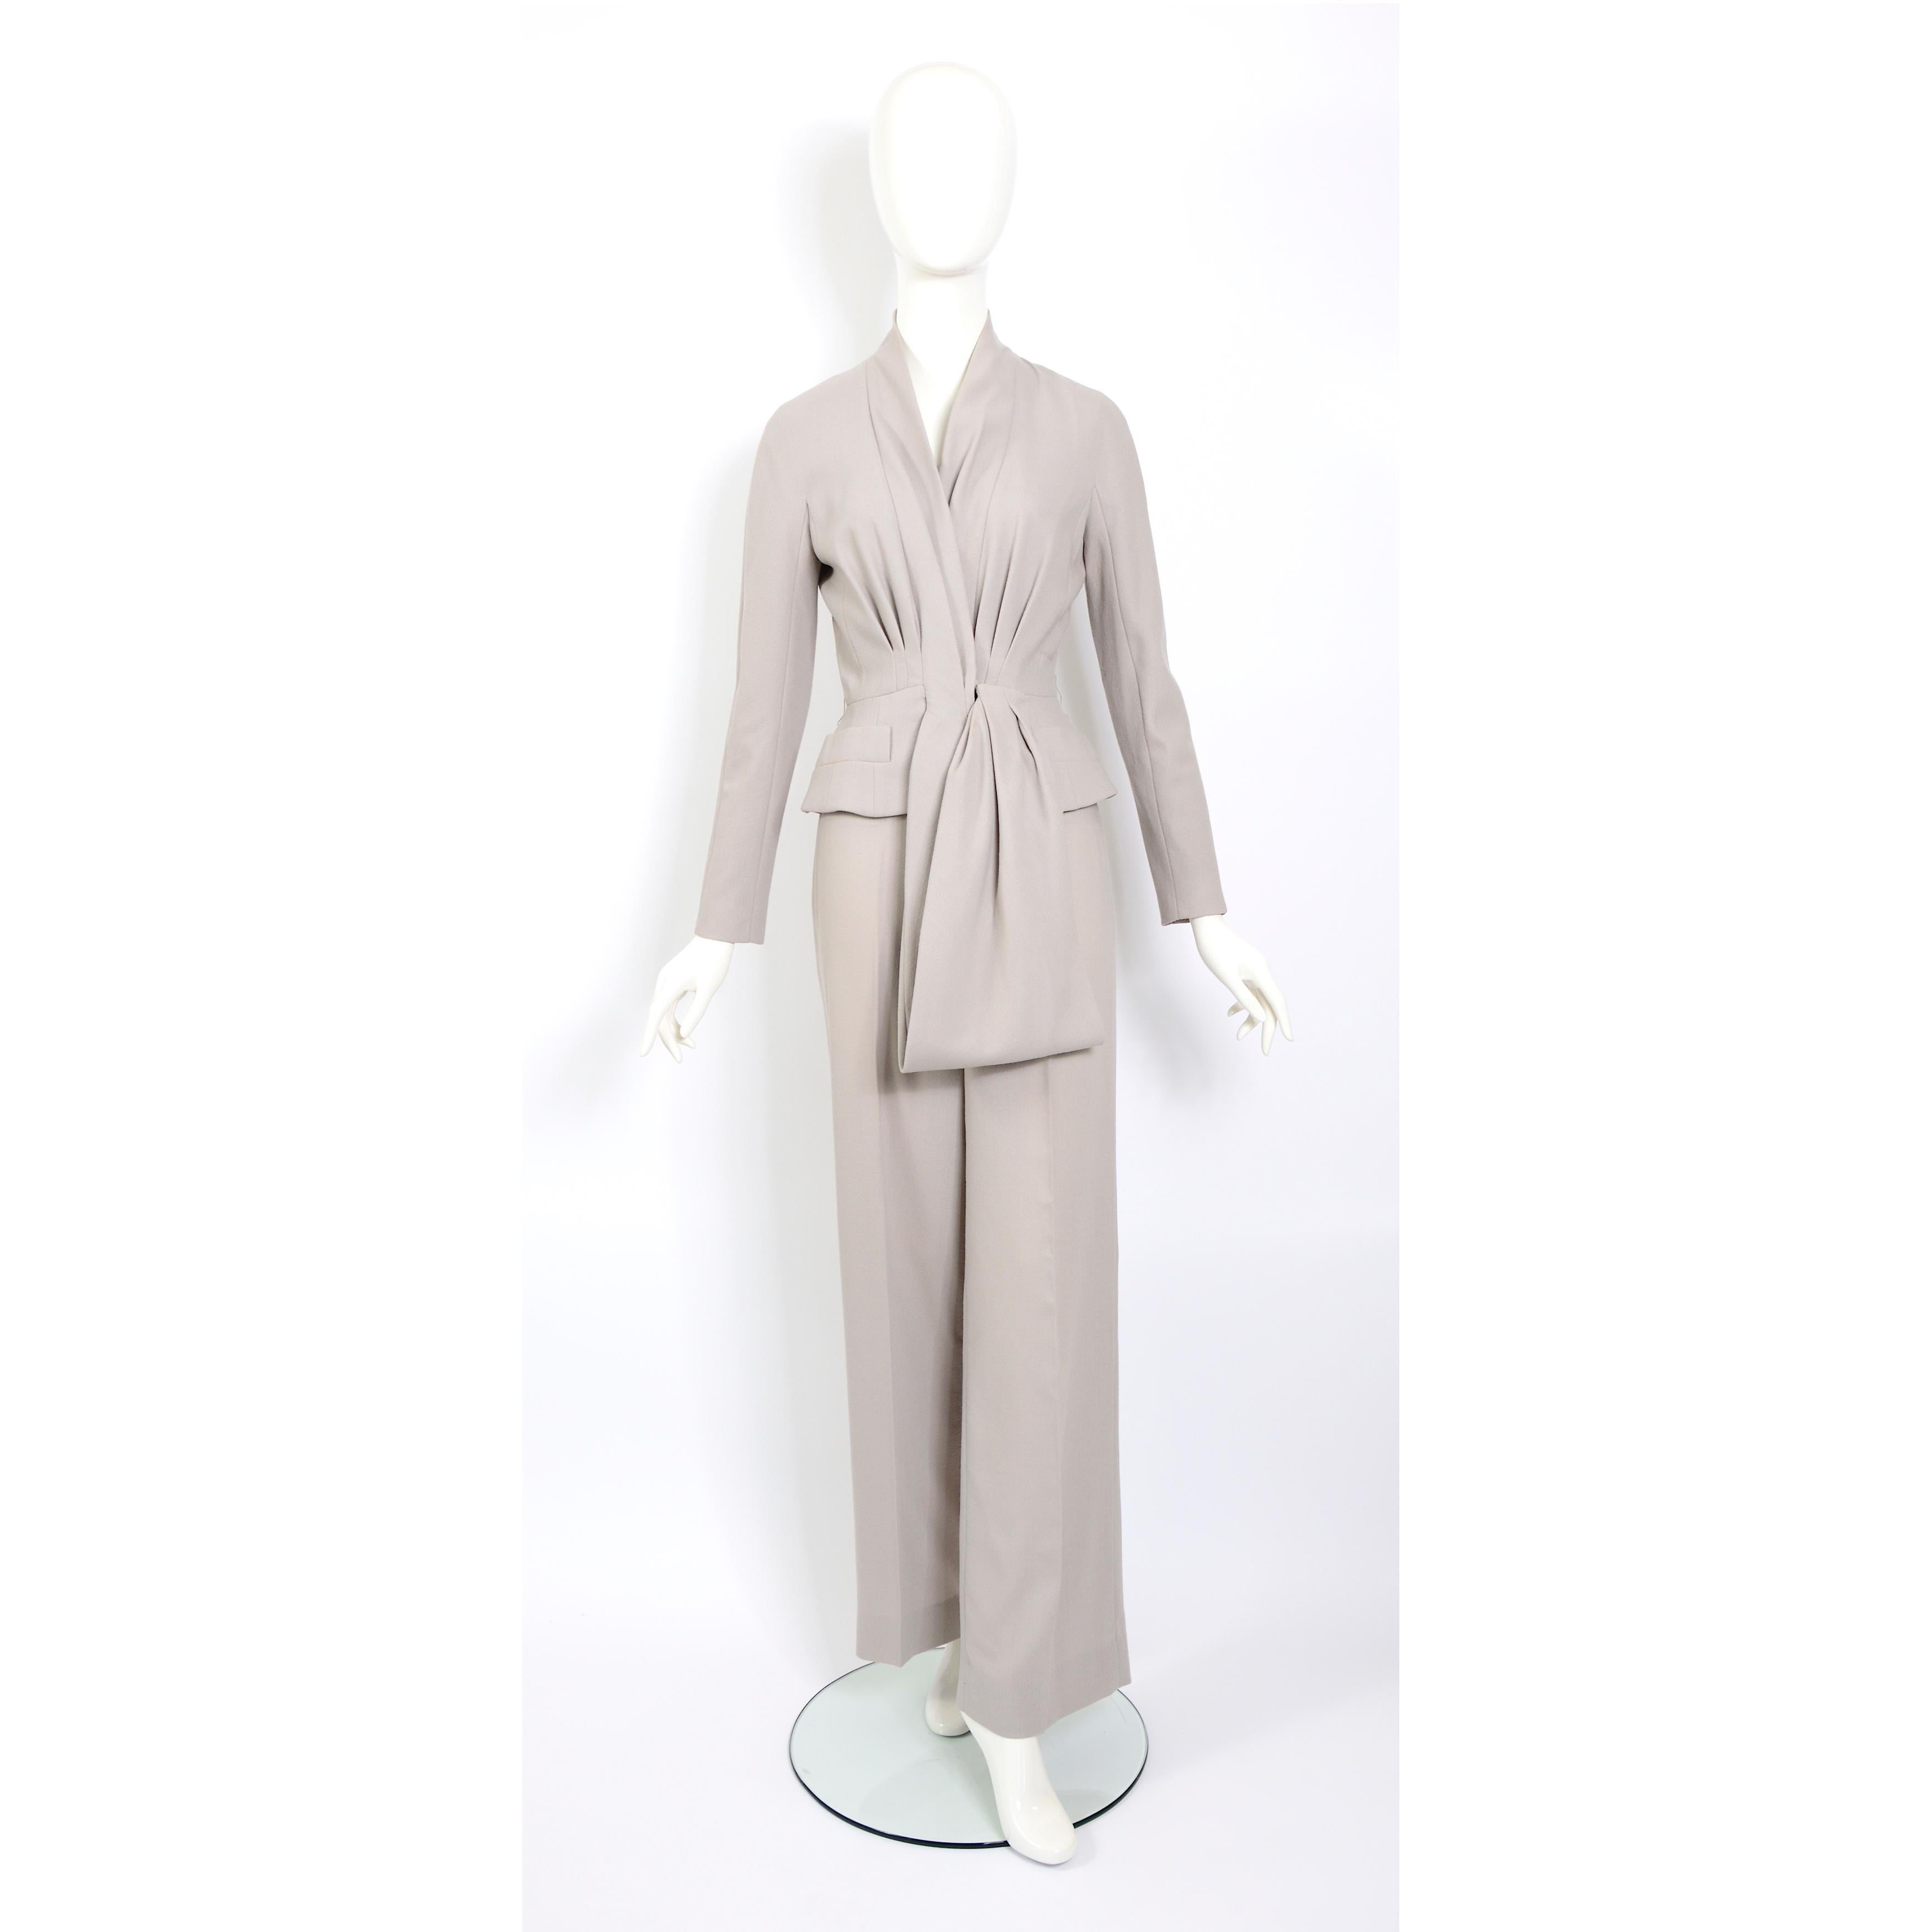 The Christian Dior by John Galliano vintage 2008 ready-to-wear draped waist belt jacket and pants ensemble suit is a stunning piece that embodies the designer's signature style. 
The fully lined jacket is designed with a V-neckline and features a